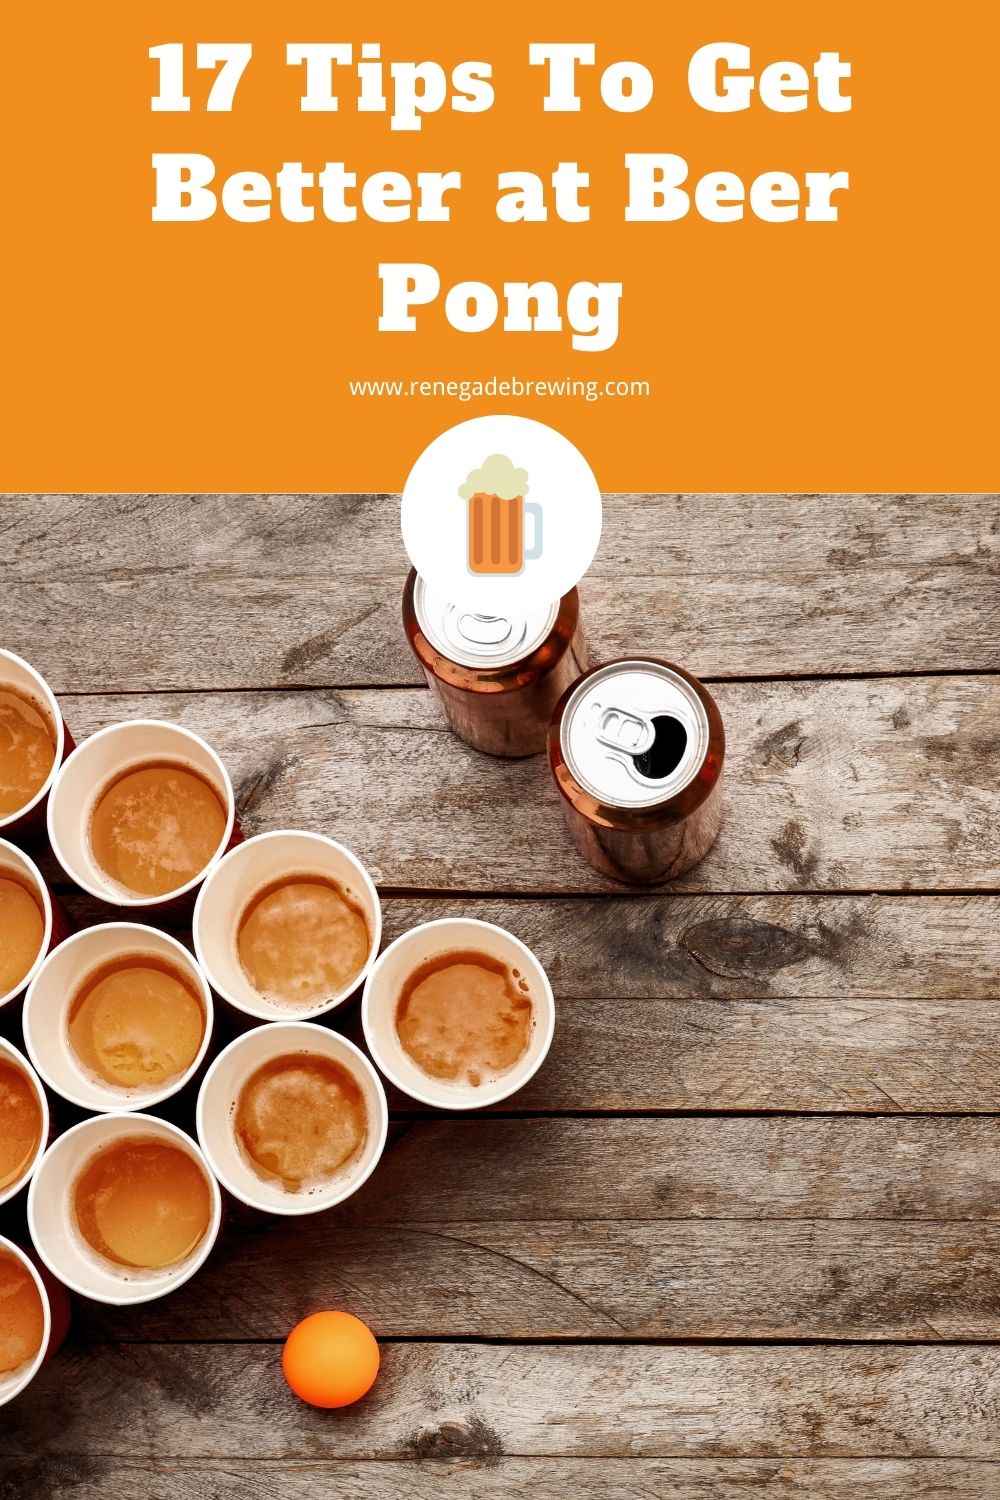 17 Tips To Get Better at Beer Pong 2